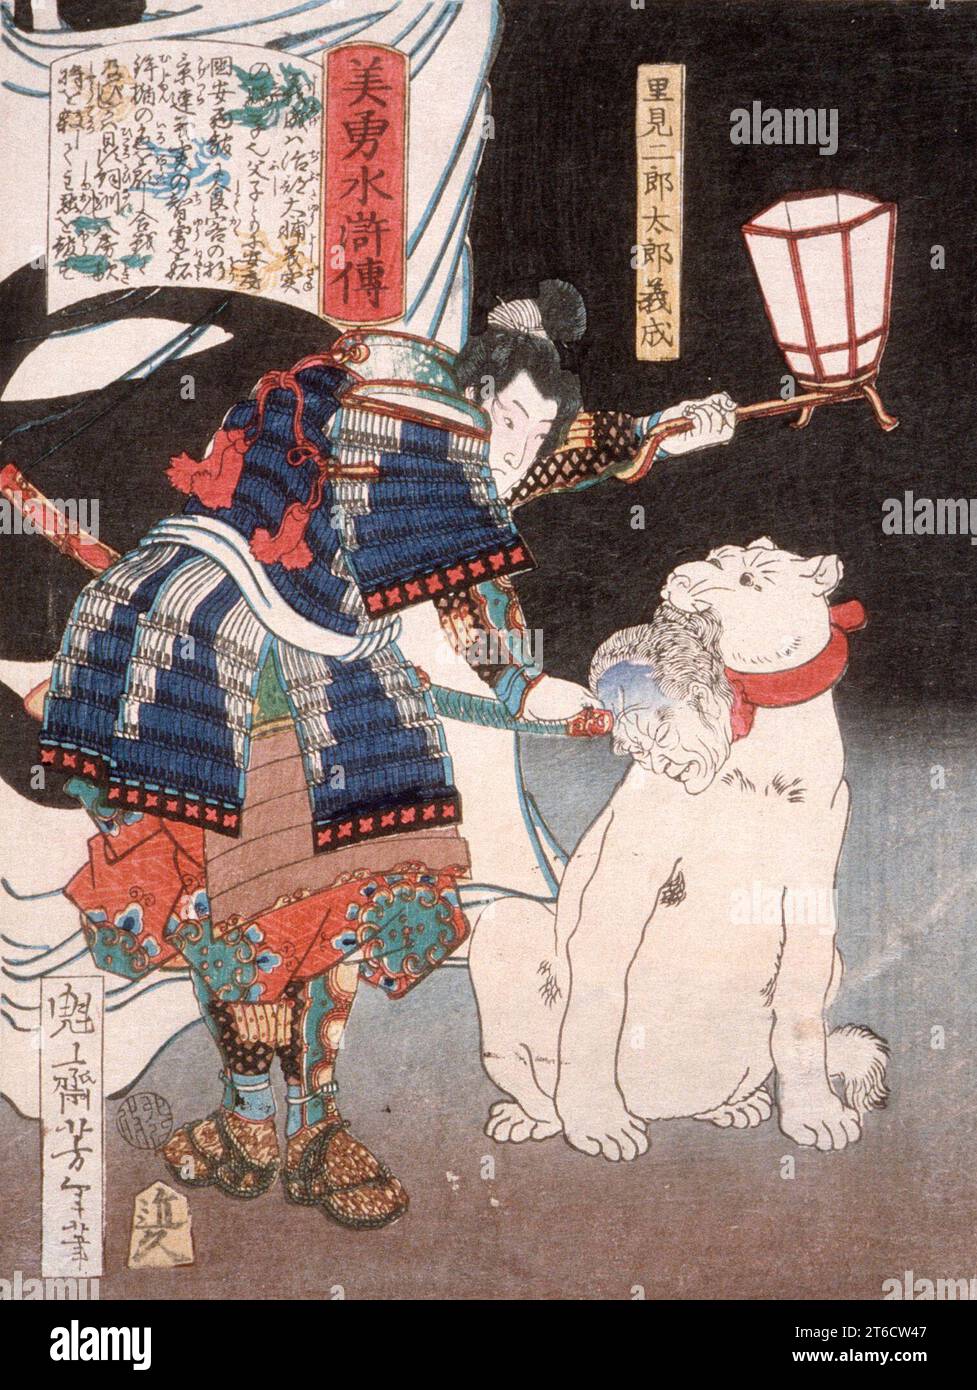 Satomi Jirotaro Yoshinari Inspecting a Head Carried by a Dog, 1867. Series: Beauty and Valor in the Novel Suikoden. Stock Photo